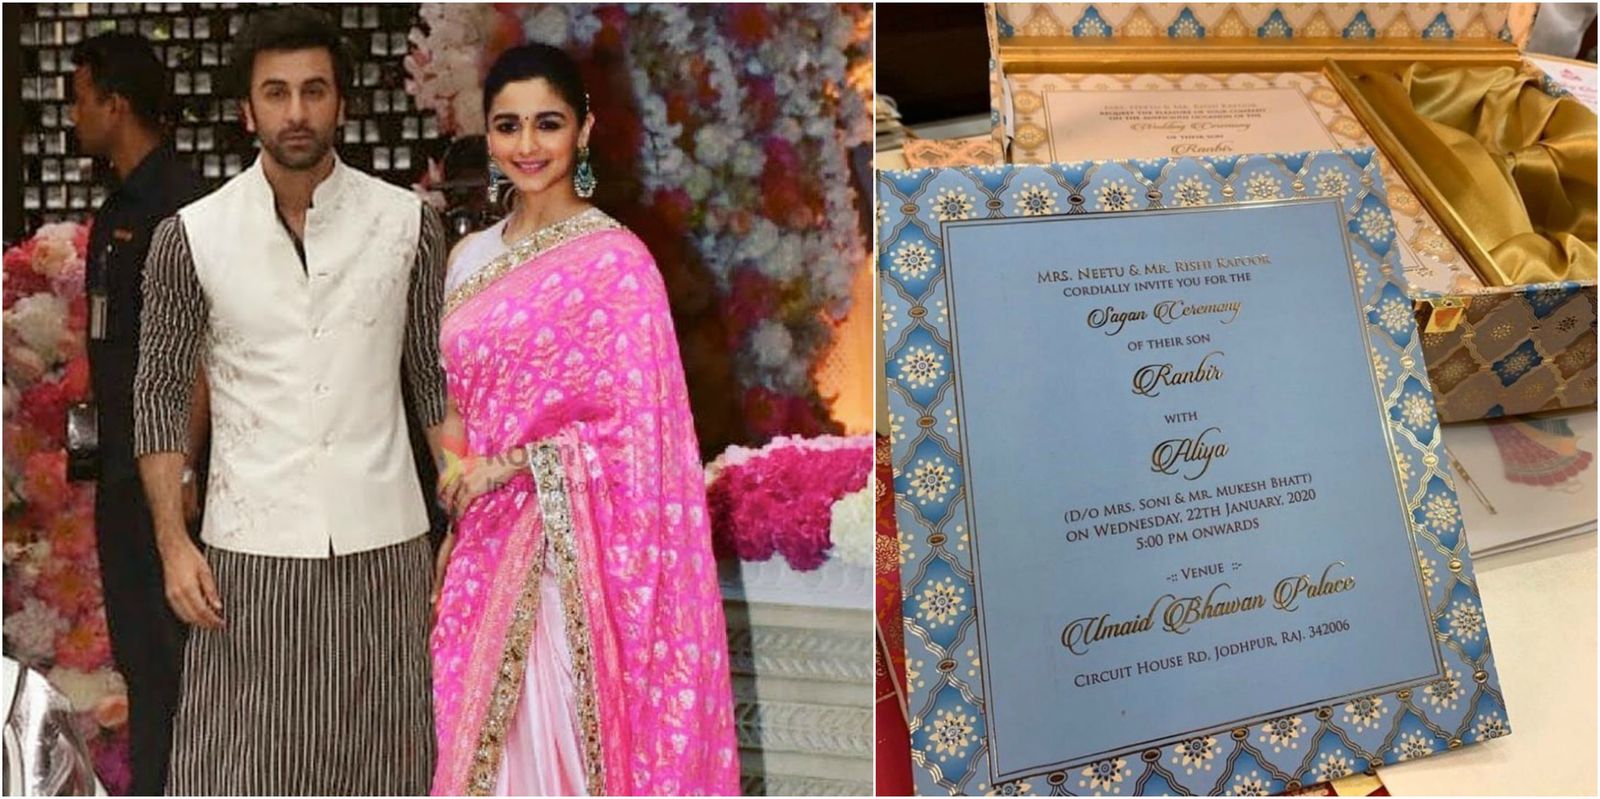 Ranbir Kapoor And Alia Bhatt’s Engagement Invitation Card Takes The Internet by Storm, Here’s The Truth About It